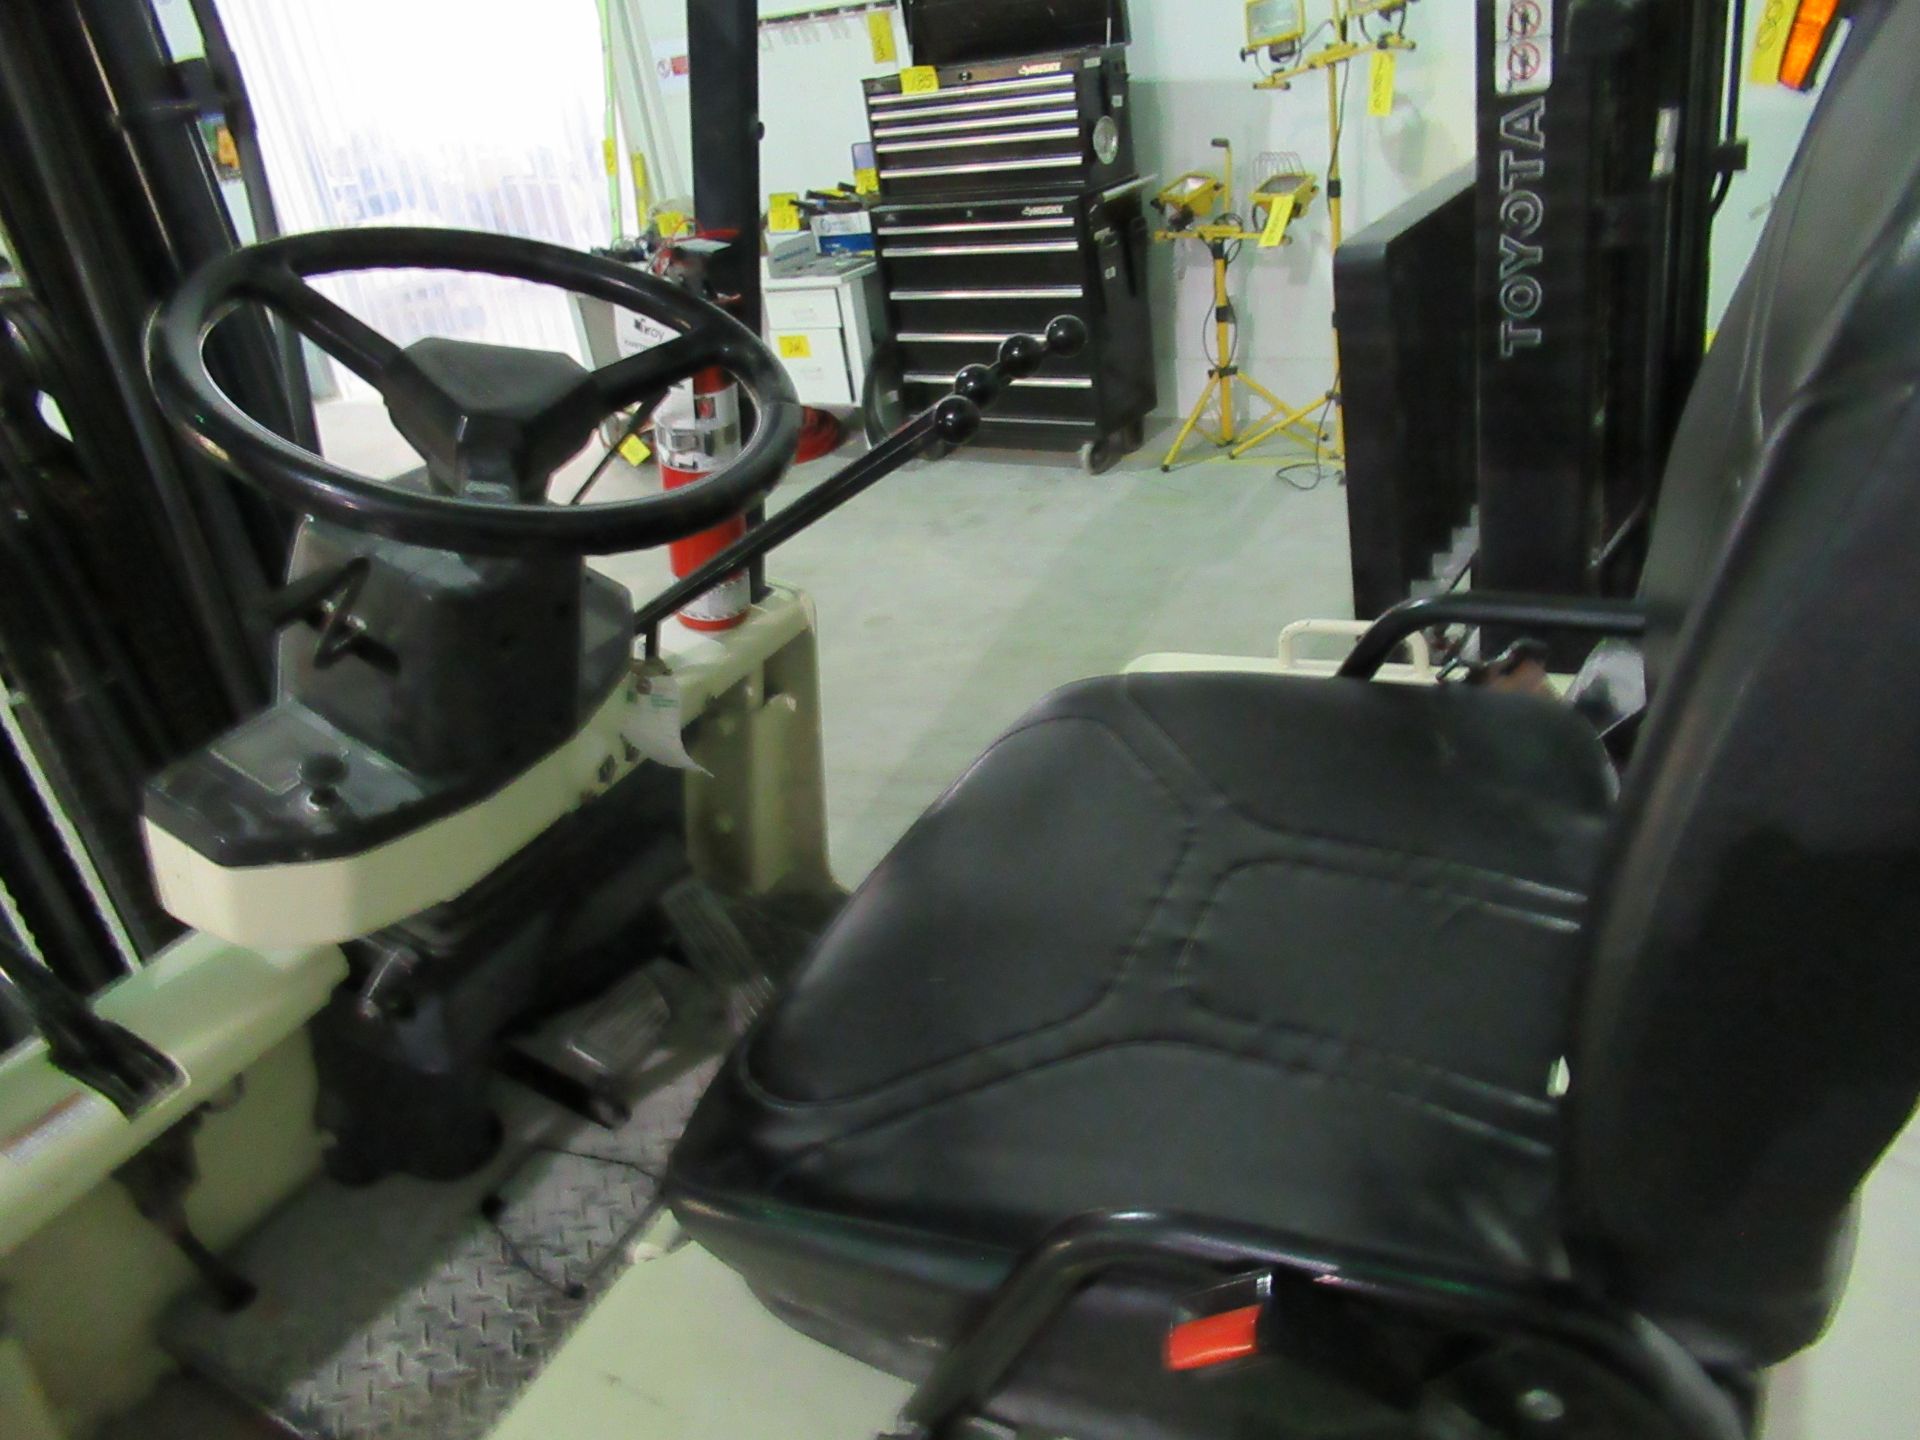 NISSAN CYG021-25S, 4,250#, 3-STAGE ELECTRIC FORKLIFT W/SIDESHIFT, C&D FERRO FIVE CHARGER, 6,572 - Image 4 of 5